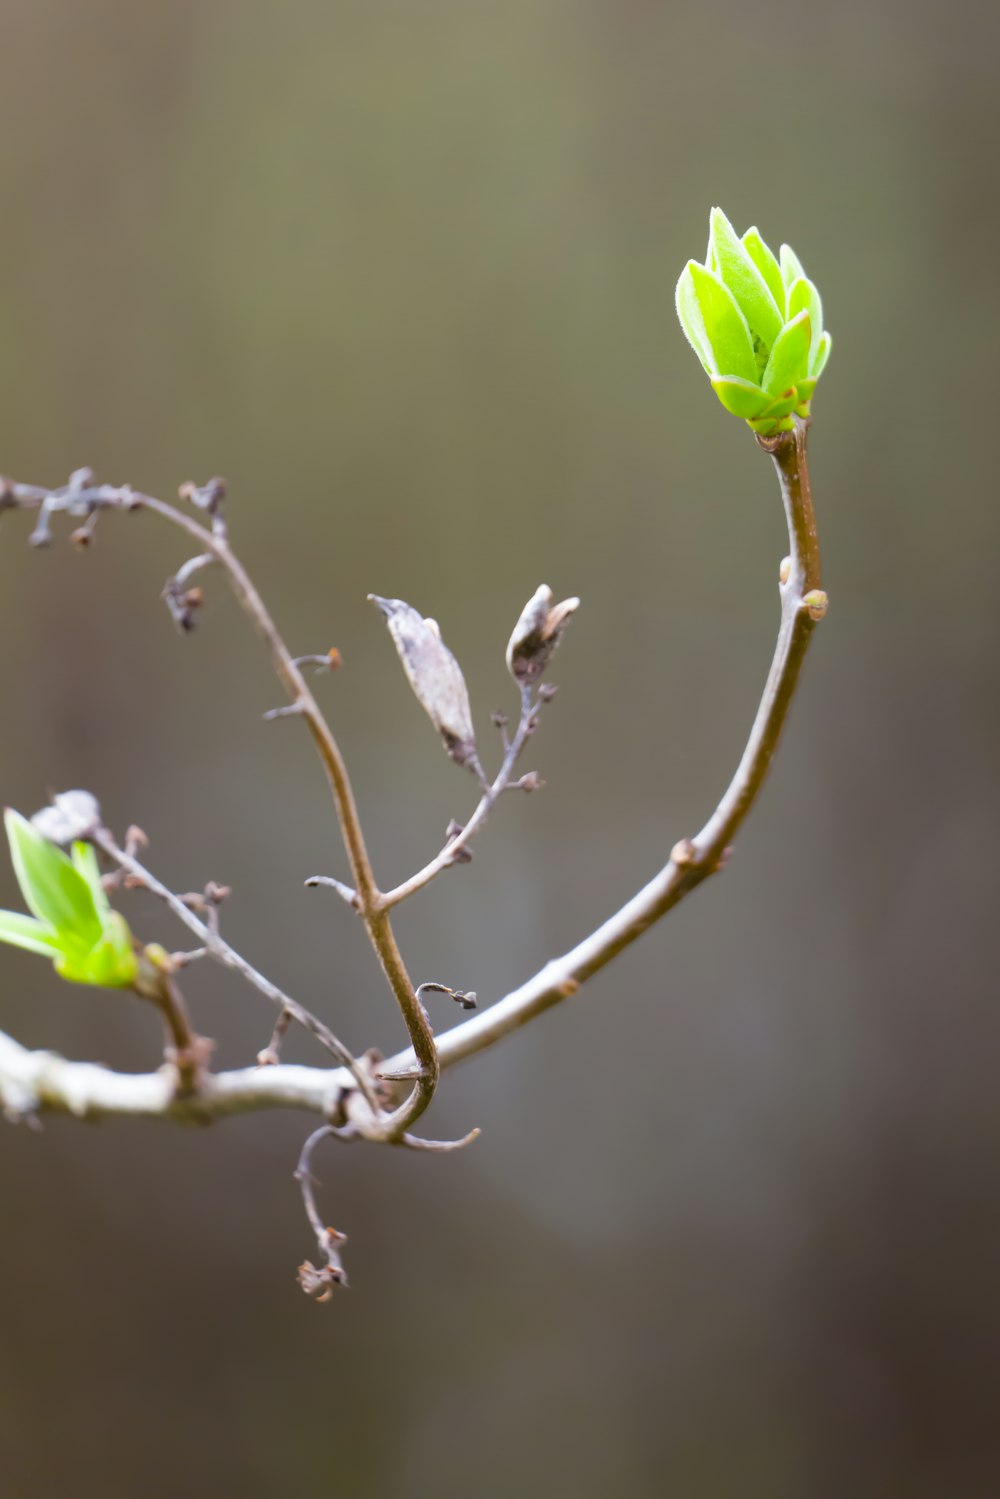 a small branch with a green flower on it